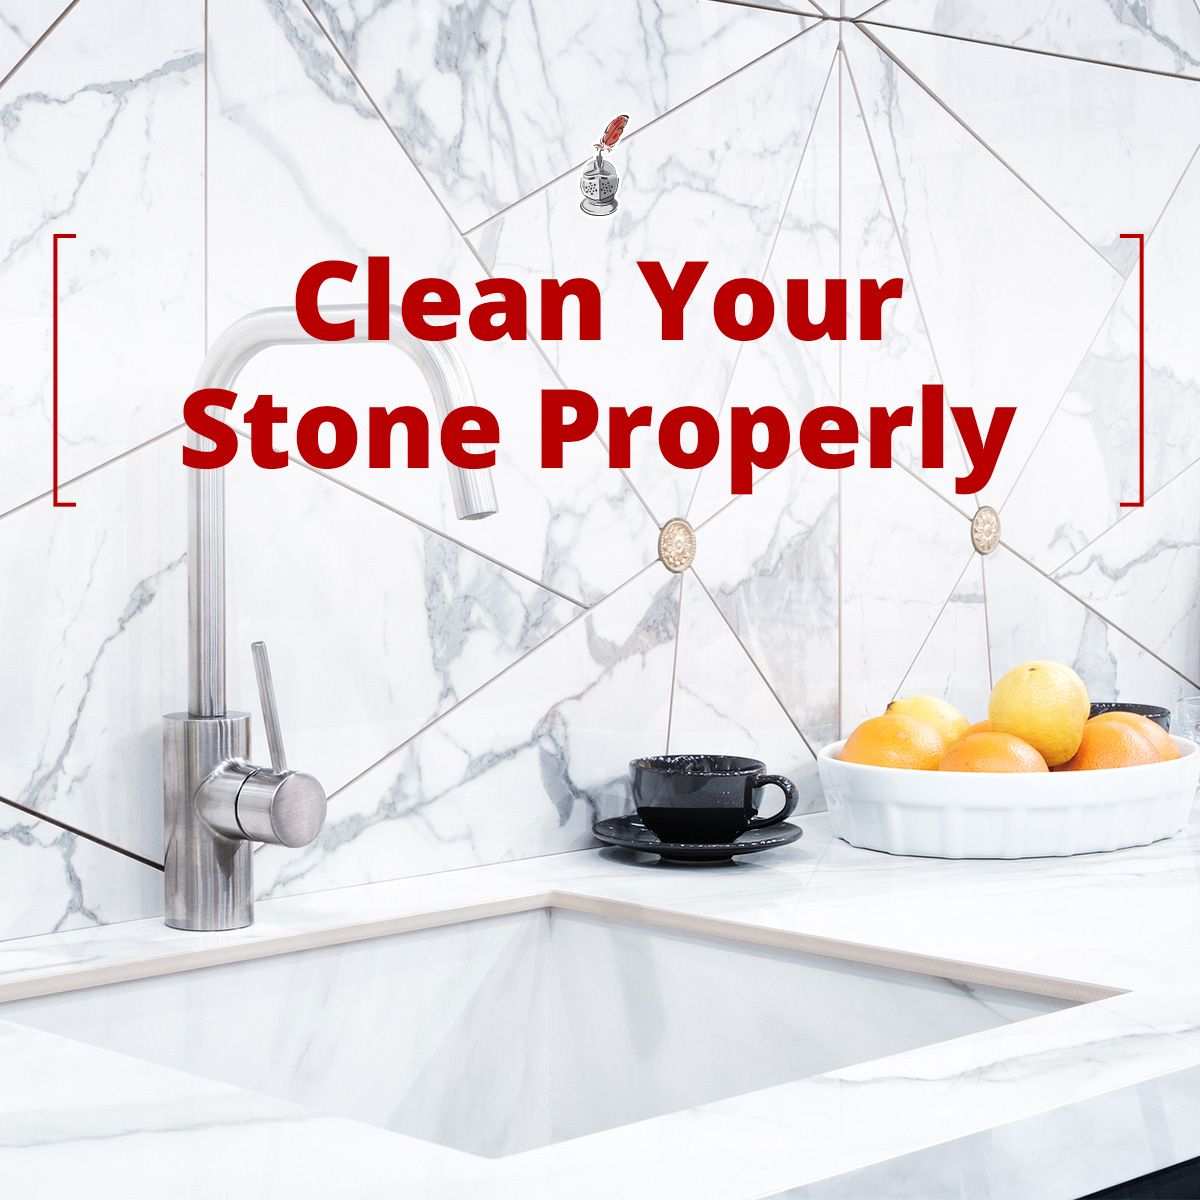 Clean Your Stone Properly